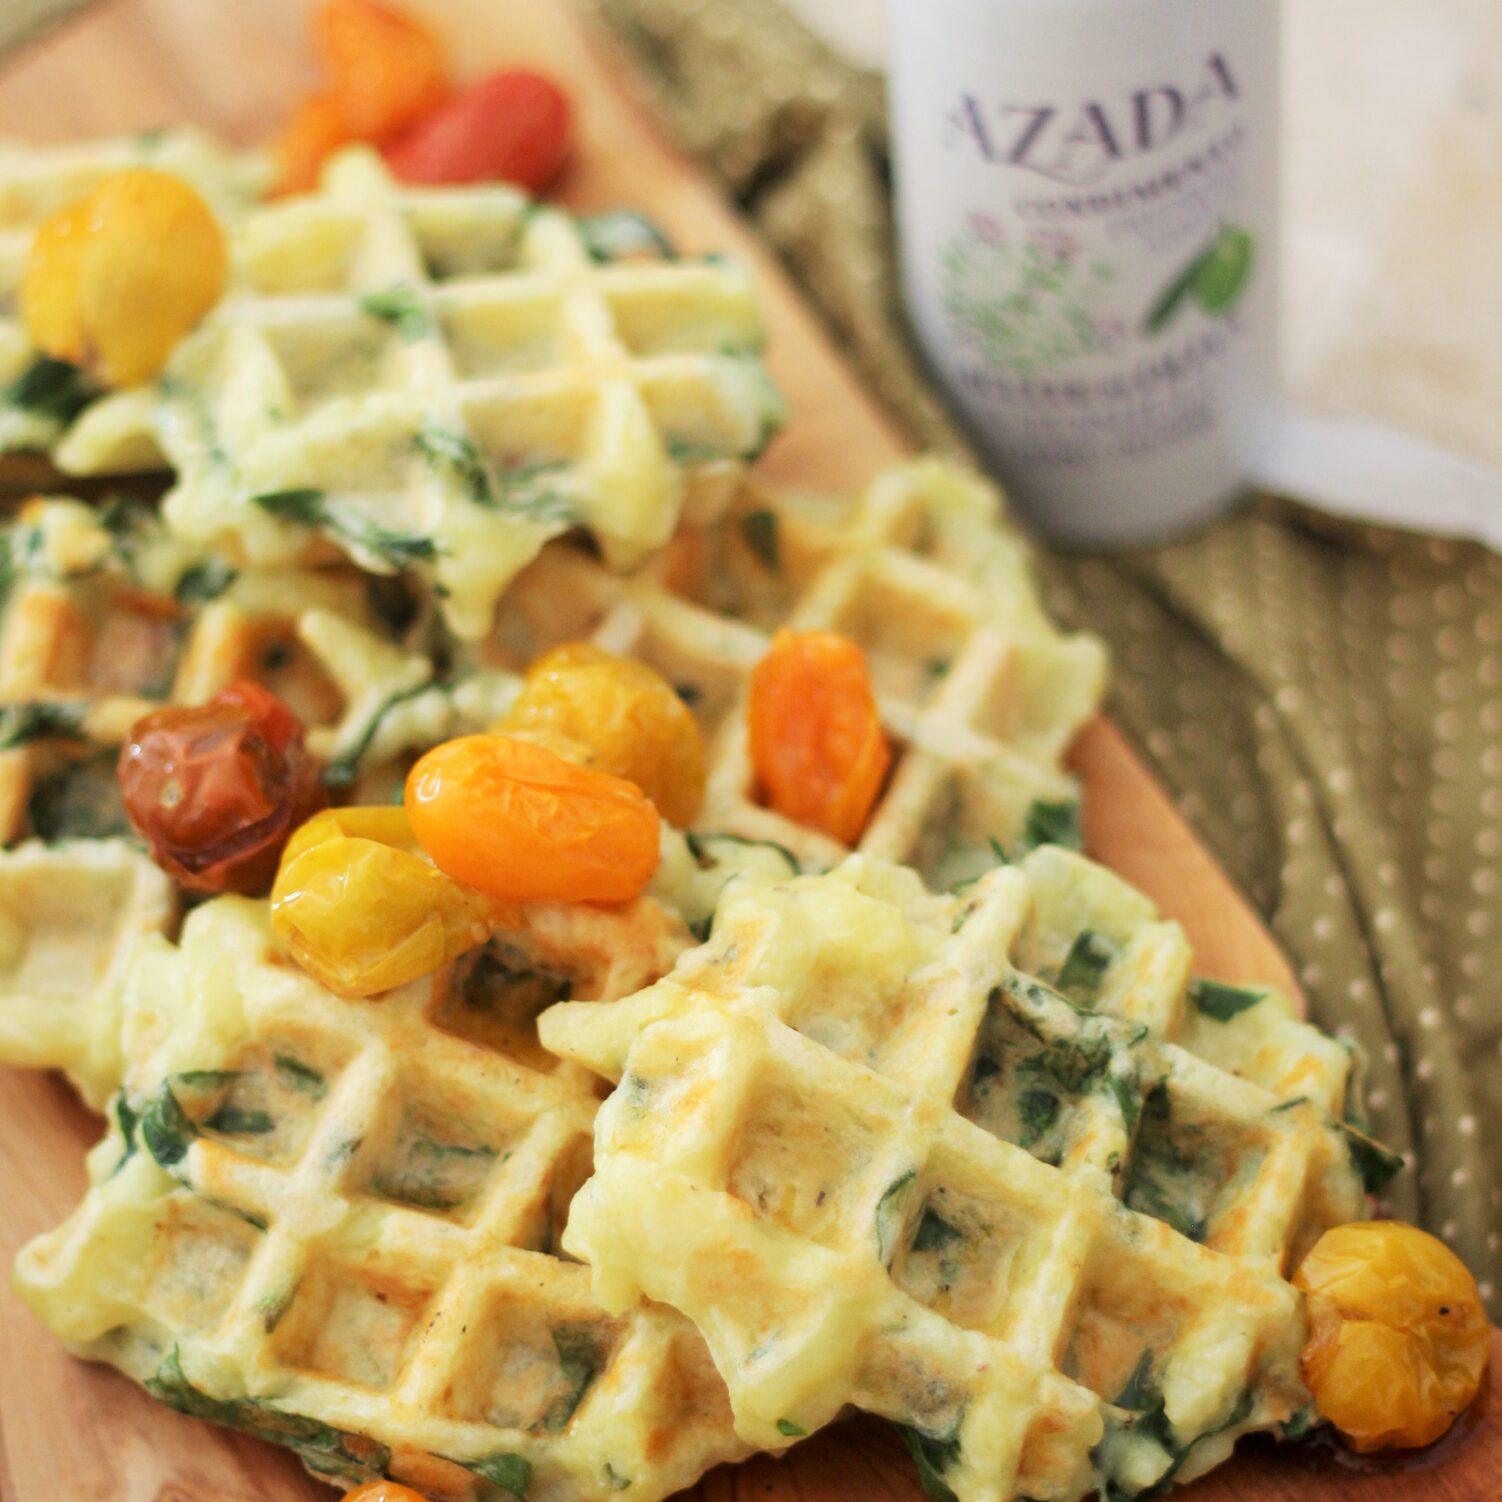 Gluten-free Potato, Parmesan and Spinach Waffles with Slow Roasted Cherry Tomatoes 1